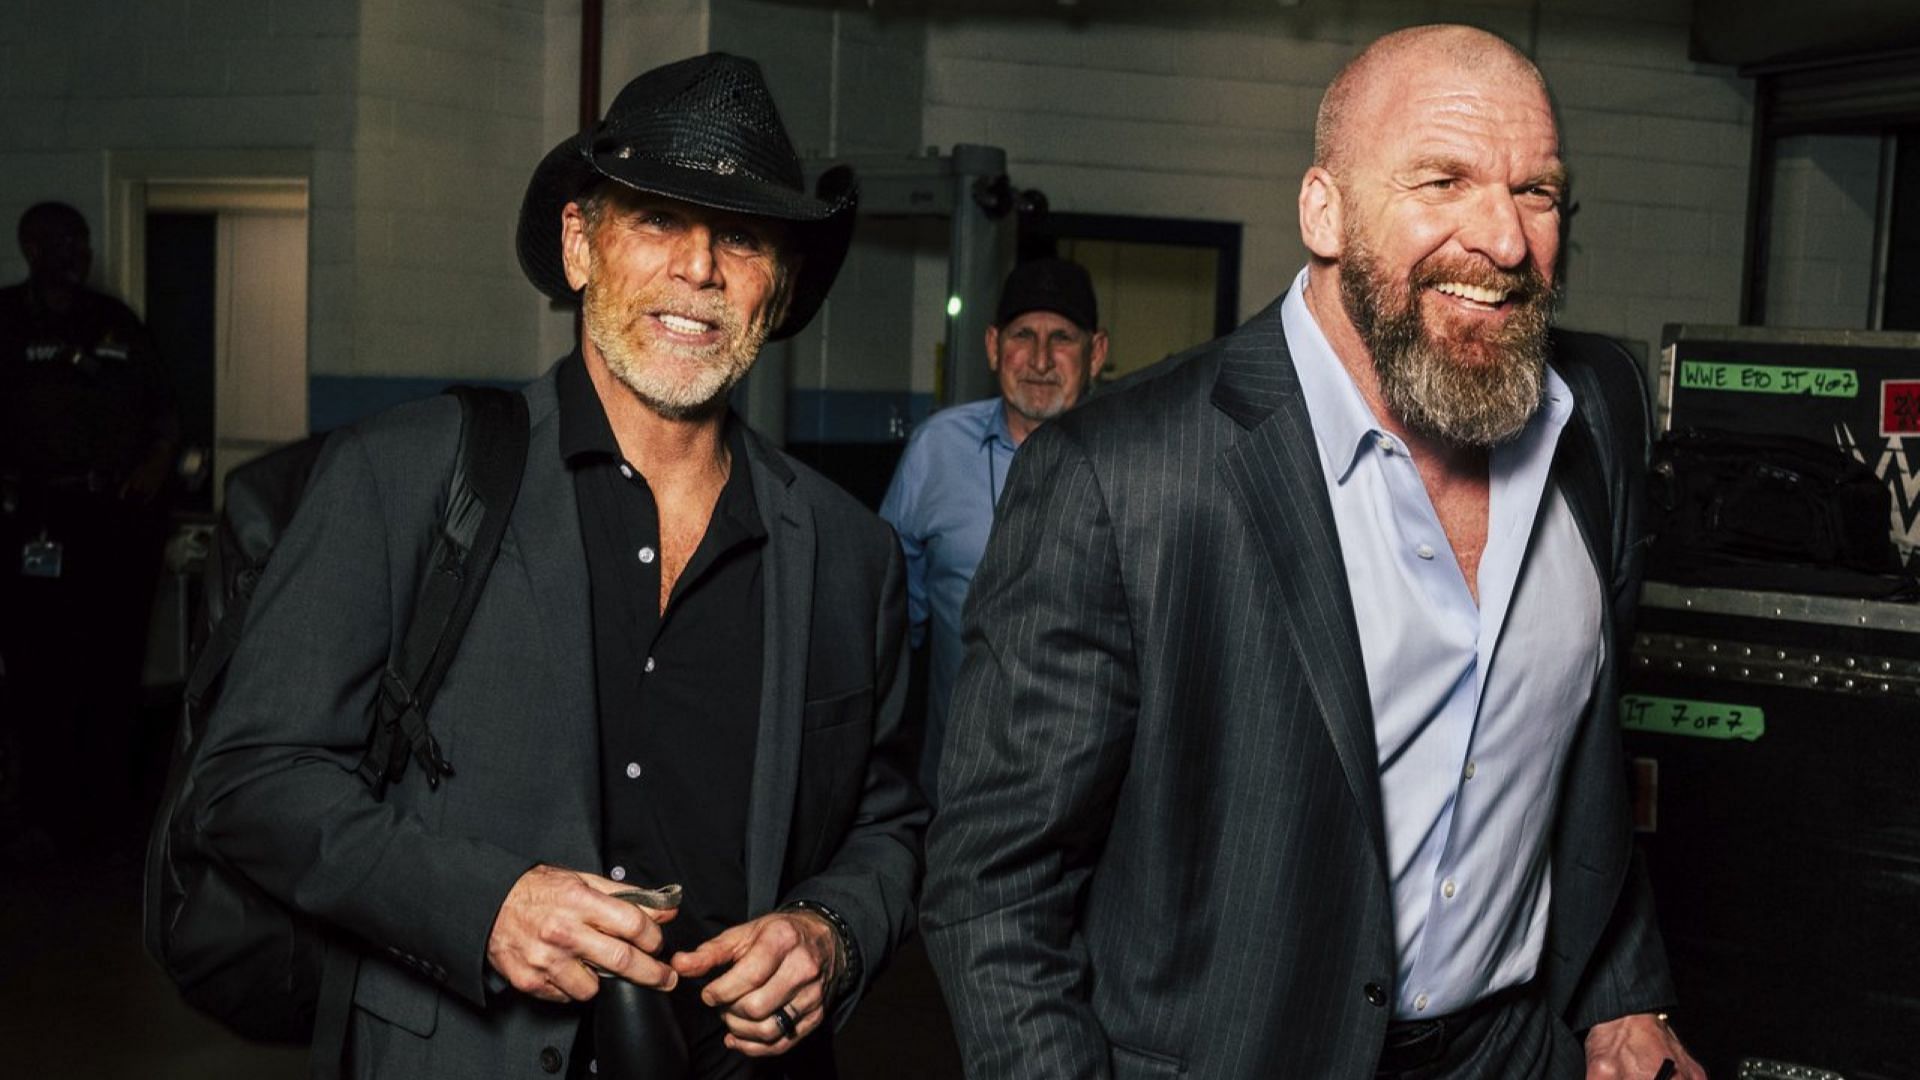 Shawn Michaels and Triple H backstage at WWE Royal Rumble